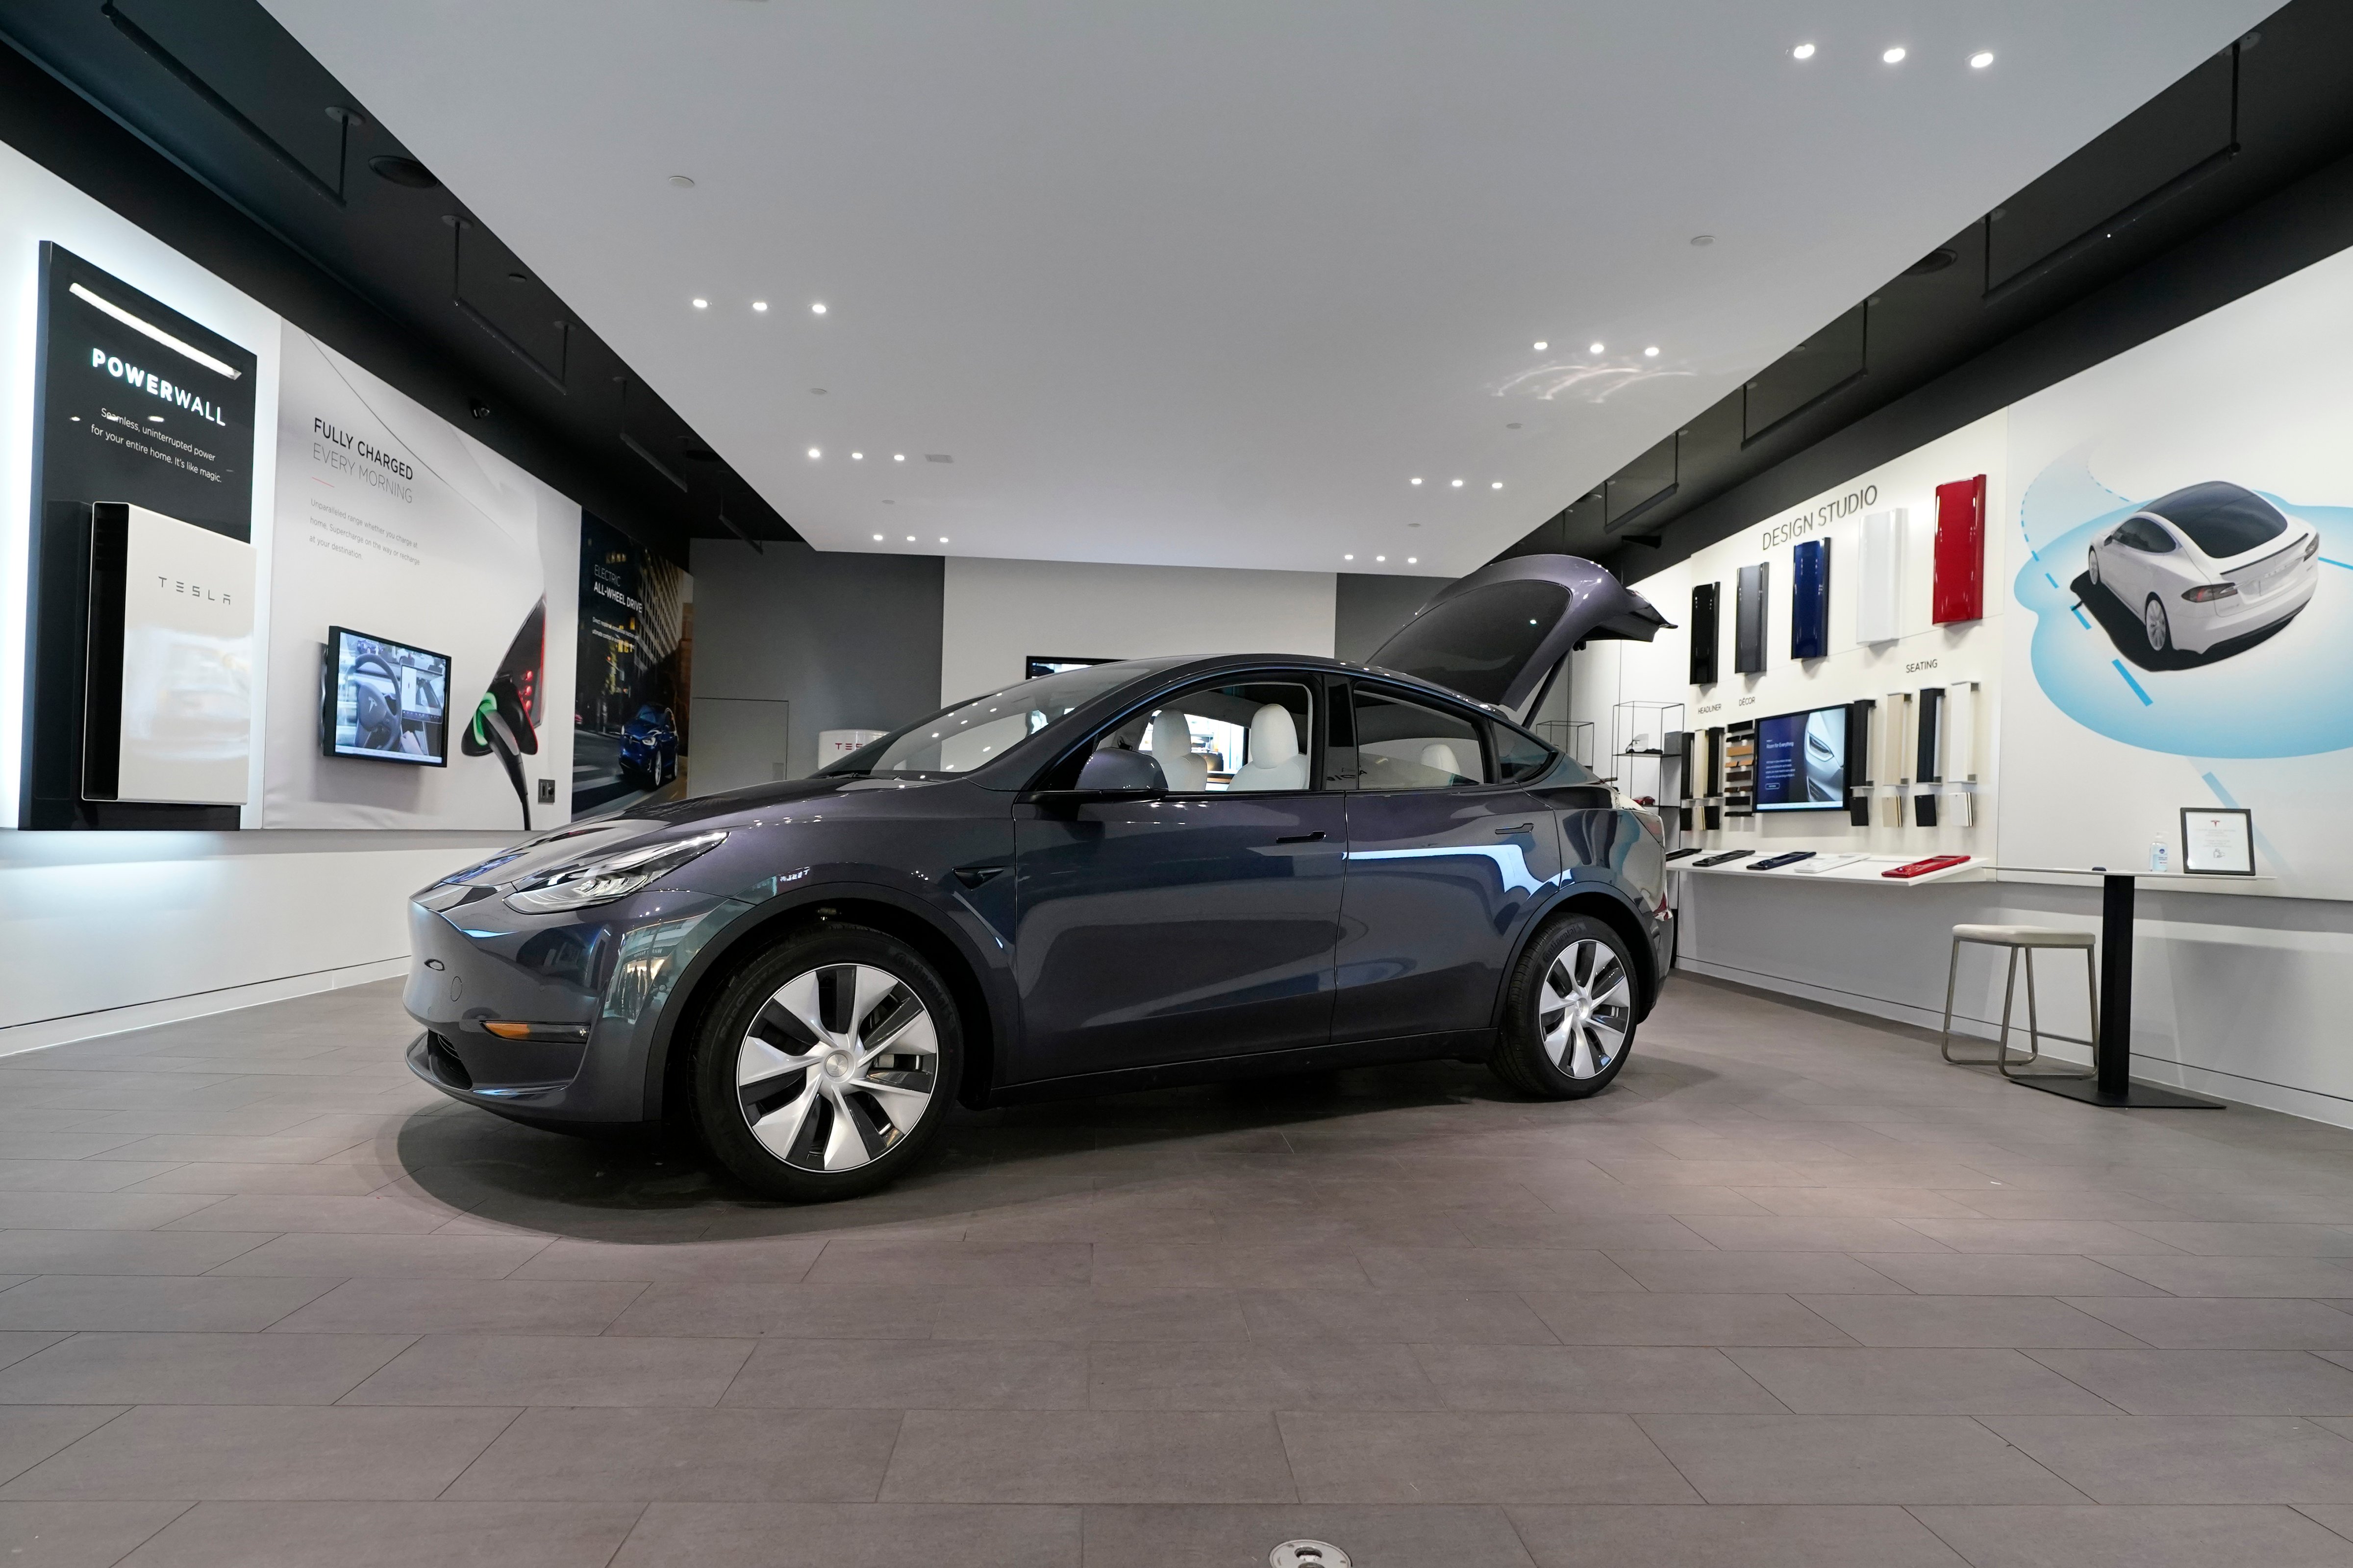 A Tesla Model Y Long Range is displayed on Feb. 24, 2021, at the Tesla Gallery in Troy, Mich. U.S. auto safety regulators have opened an investigation into Tesla’s Model Y SUV after getting two complaints that the steering wheels can come off while being driven. (AP Photo/Carlos Osorio, File)